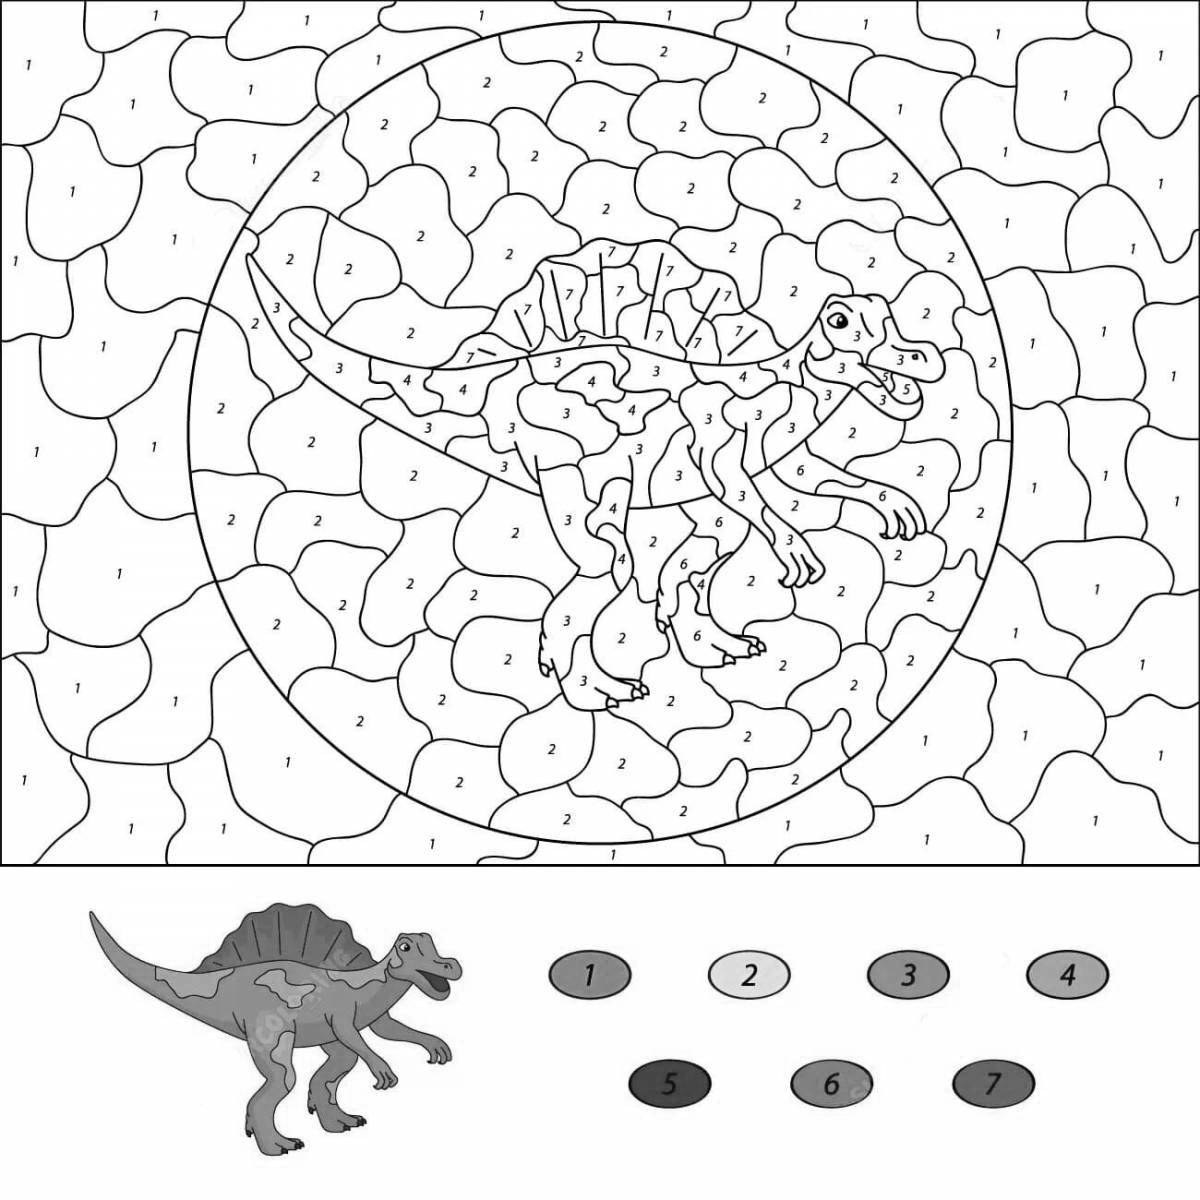 Majestic coloring dinosaurs by numbers